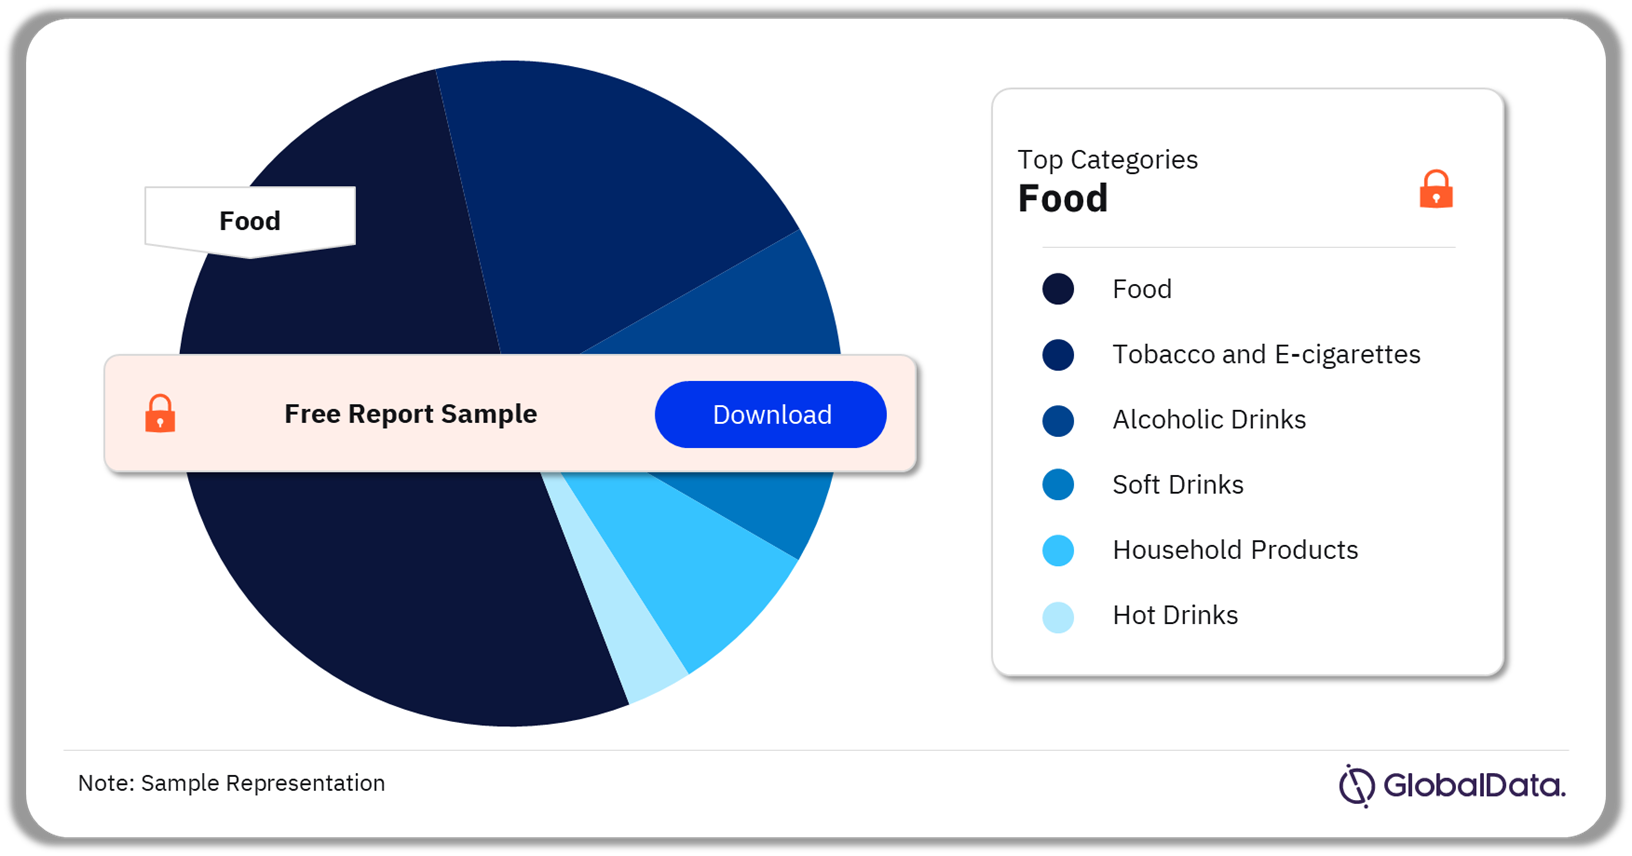 UK Food & Grocery Retailing Market Analysis by Key Categories, 2022 (%)